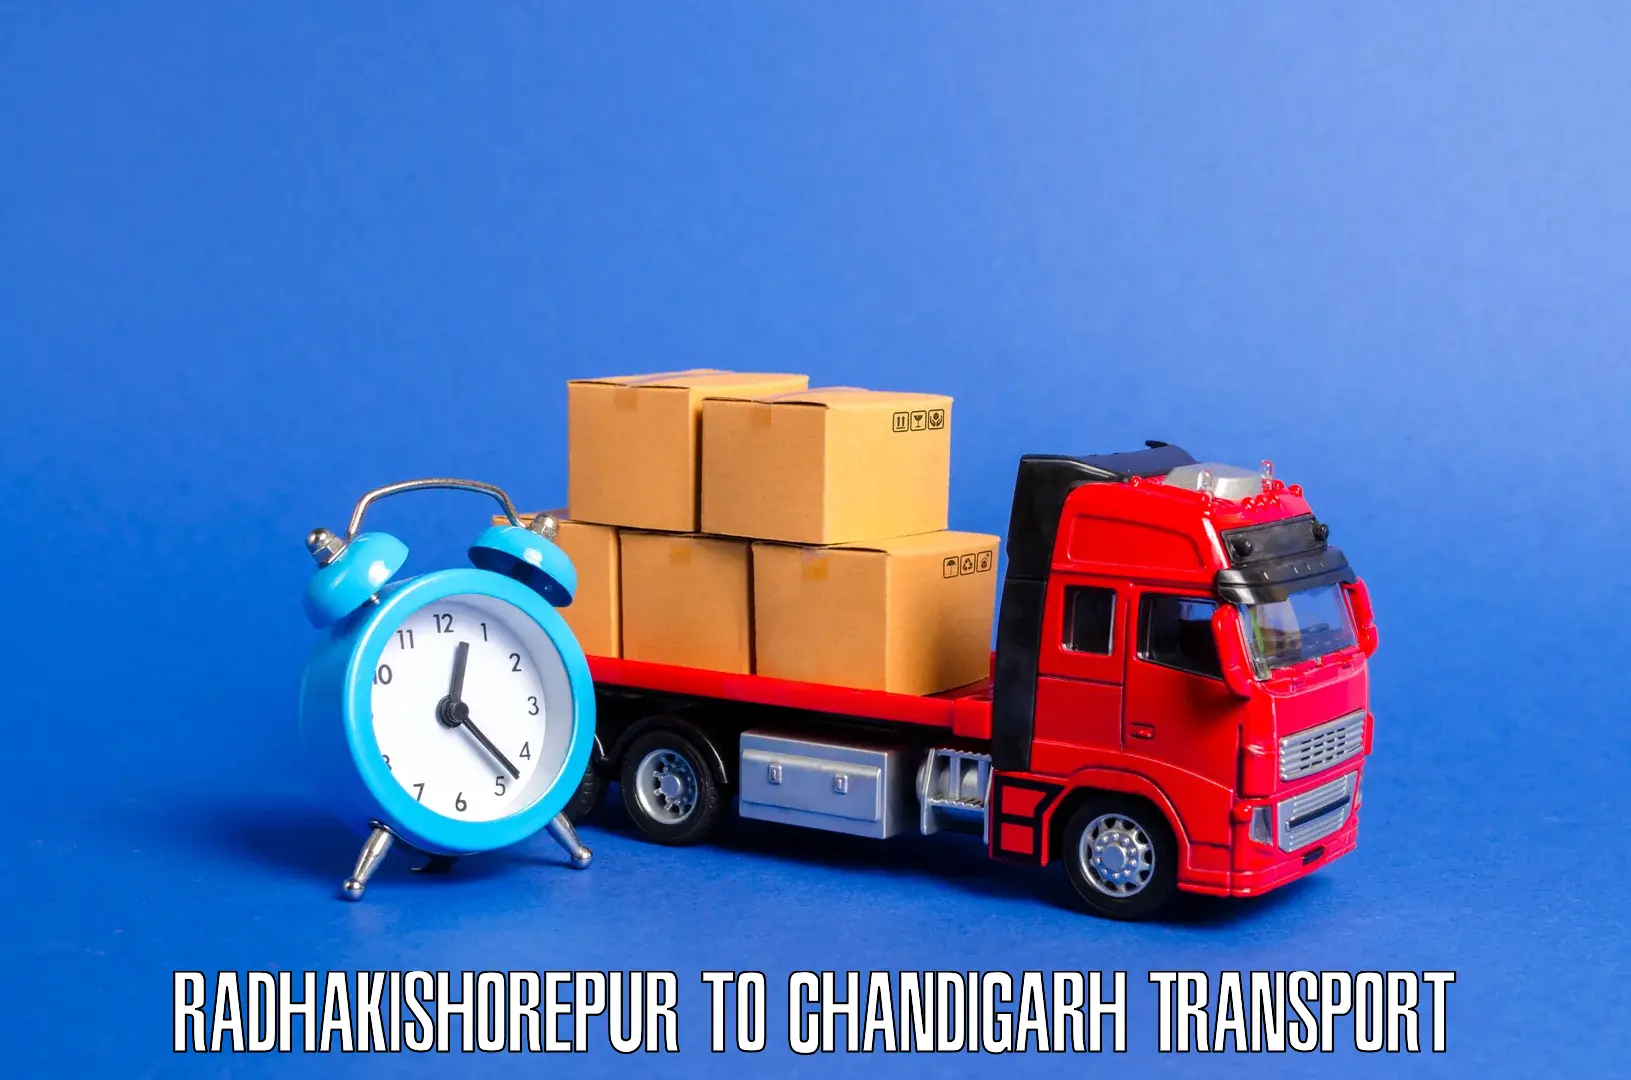 Transport bike from one state to another in Radhakishorepur to Chandigarh